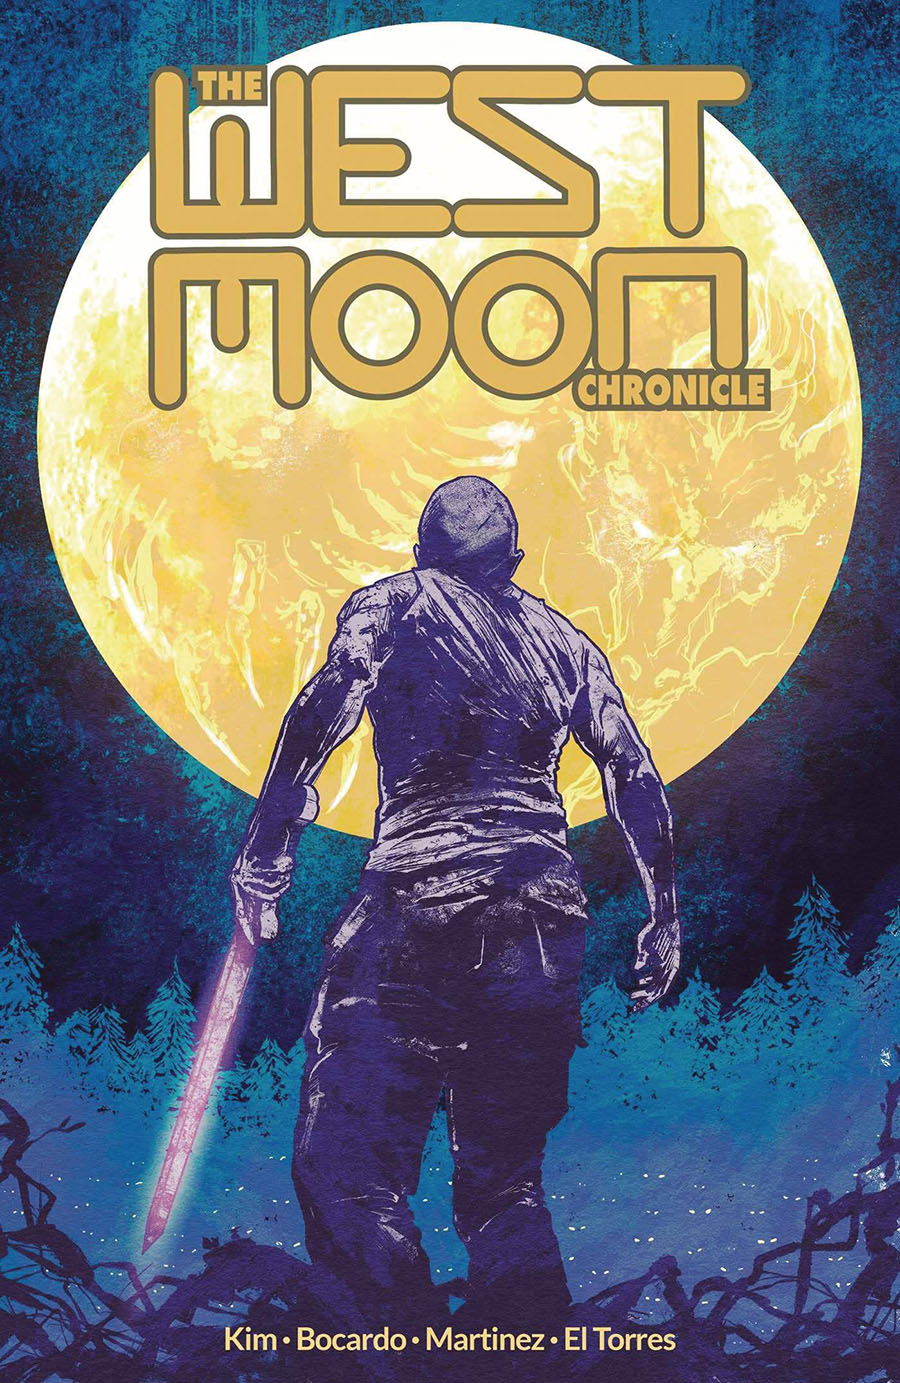 West Moon Chronicle TP